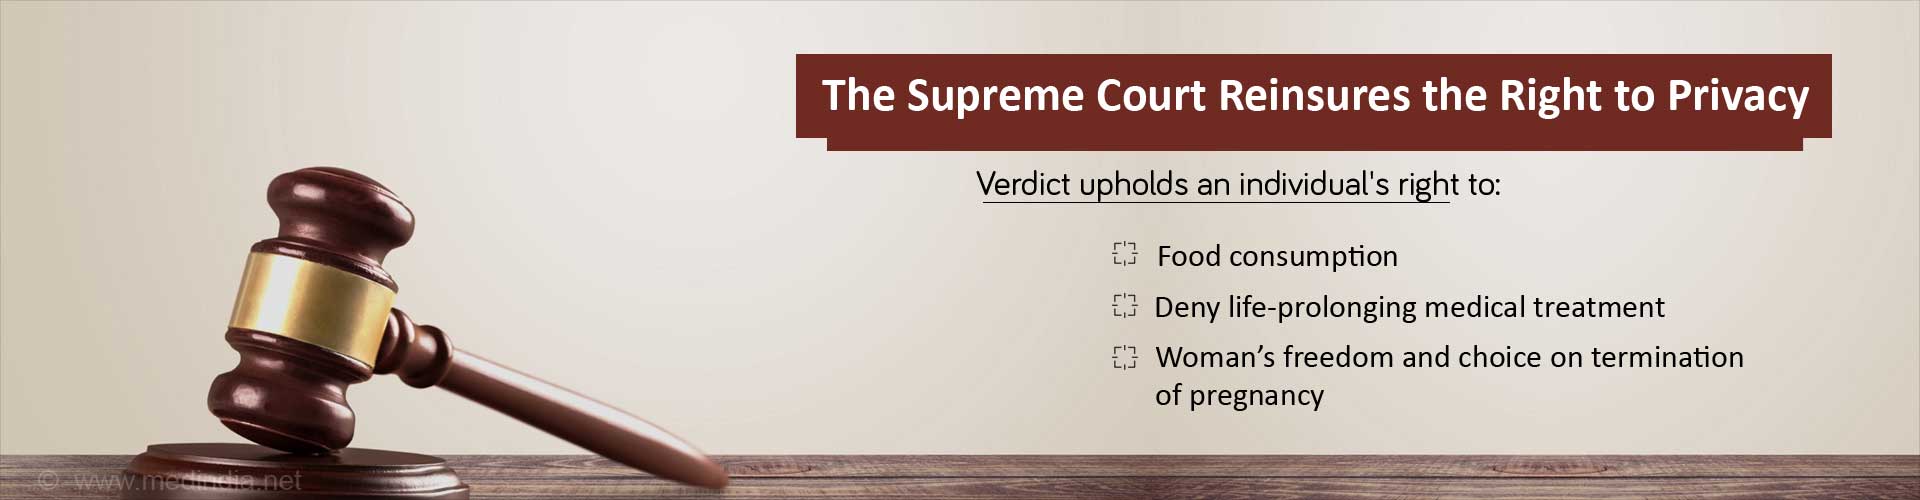 The supreme court re insures the right to privacy
verdict upholds an individual''s right to:
- food consumption
- deny life-prolonging medical treatment
- woman''s freedom and choice on termination of pregnancy